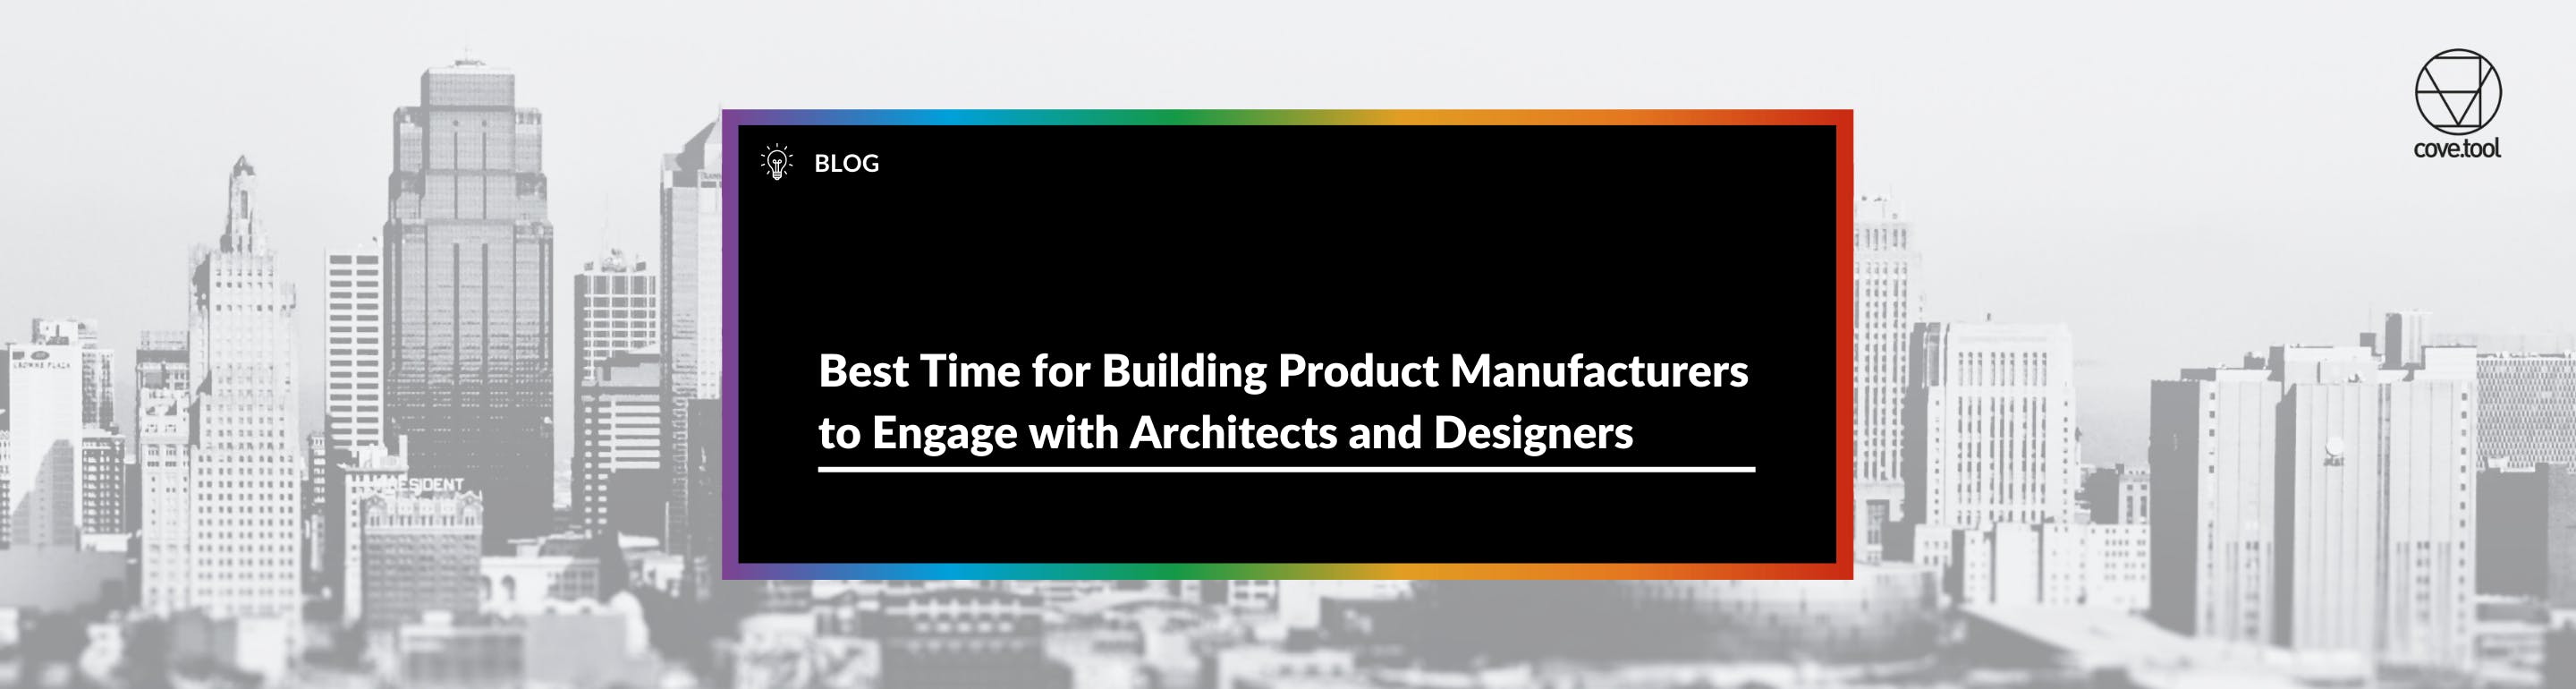 Best Time for Building Product Manufacturers to Engage with Architects and Designers